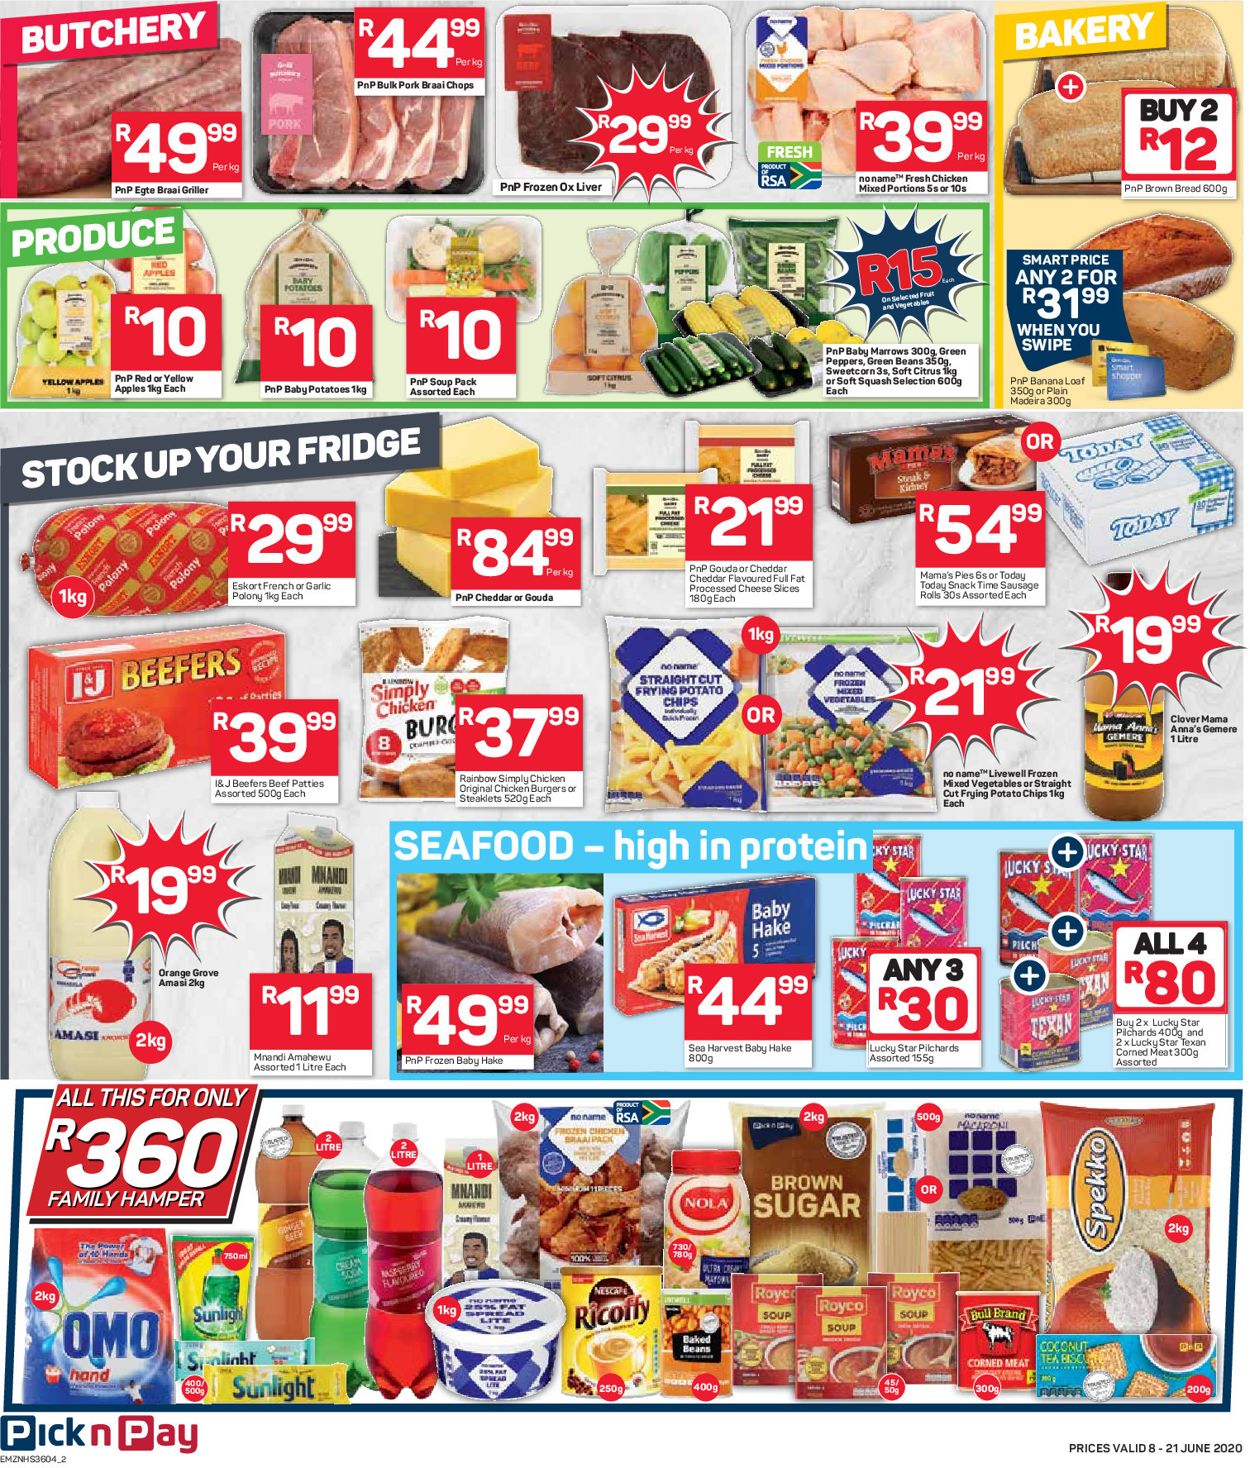 Pick n Pay Catalogue - 2020/06/08-2020/06/21 (Page 3)